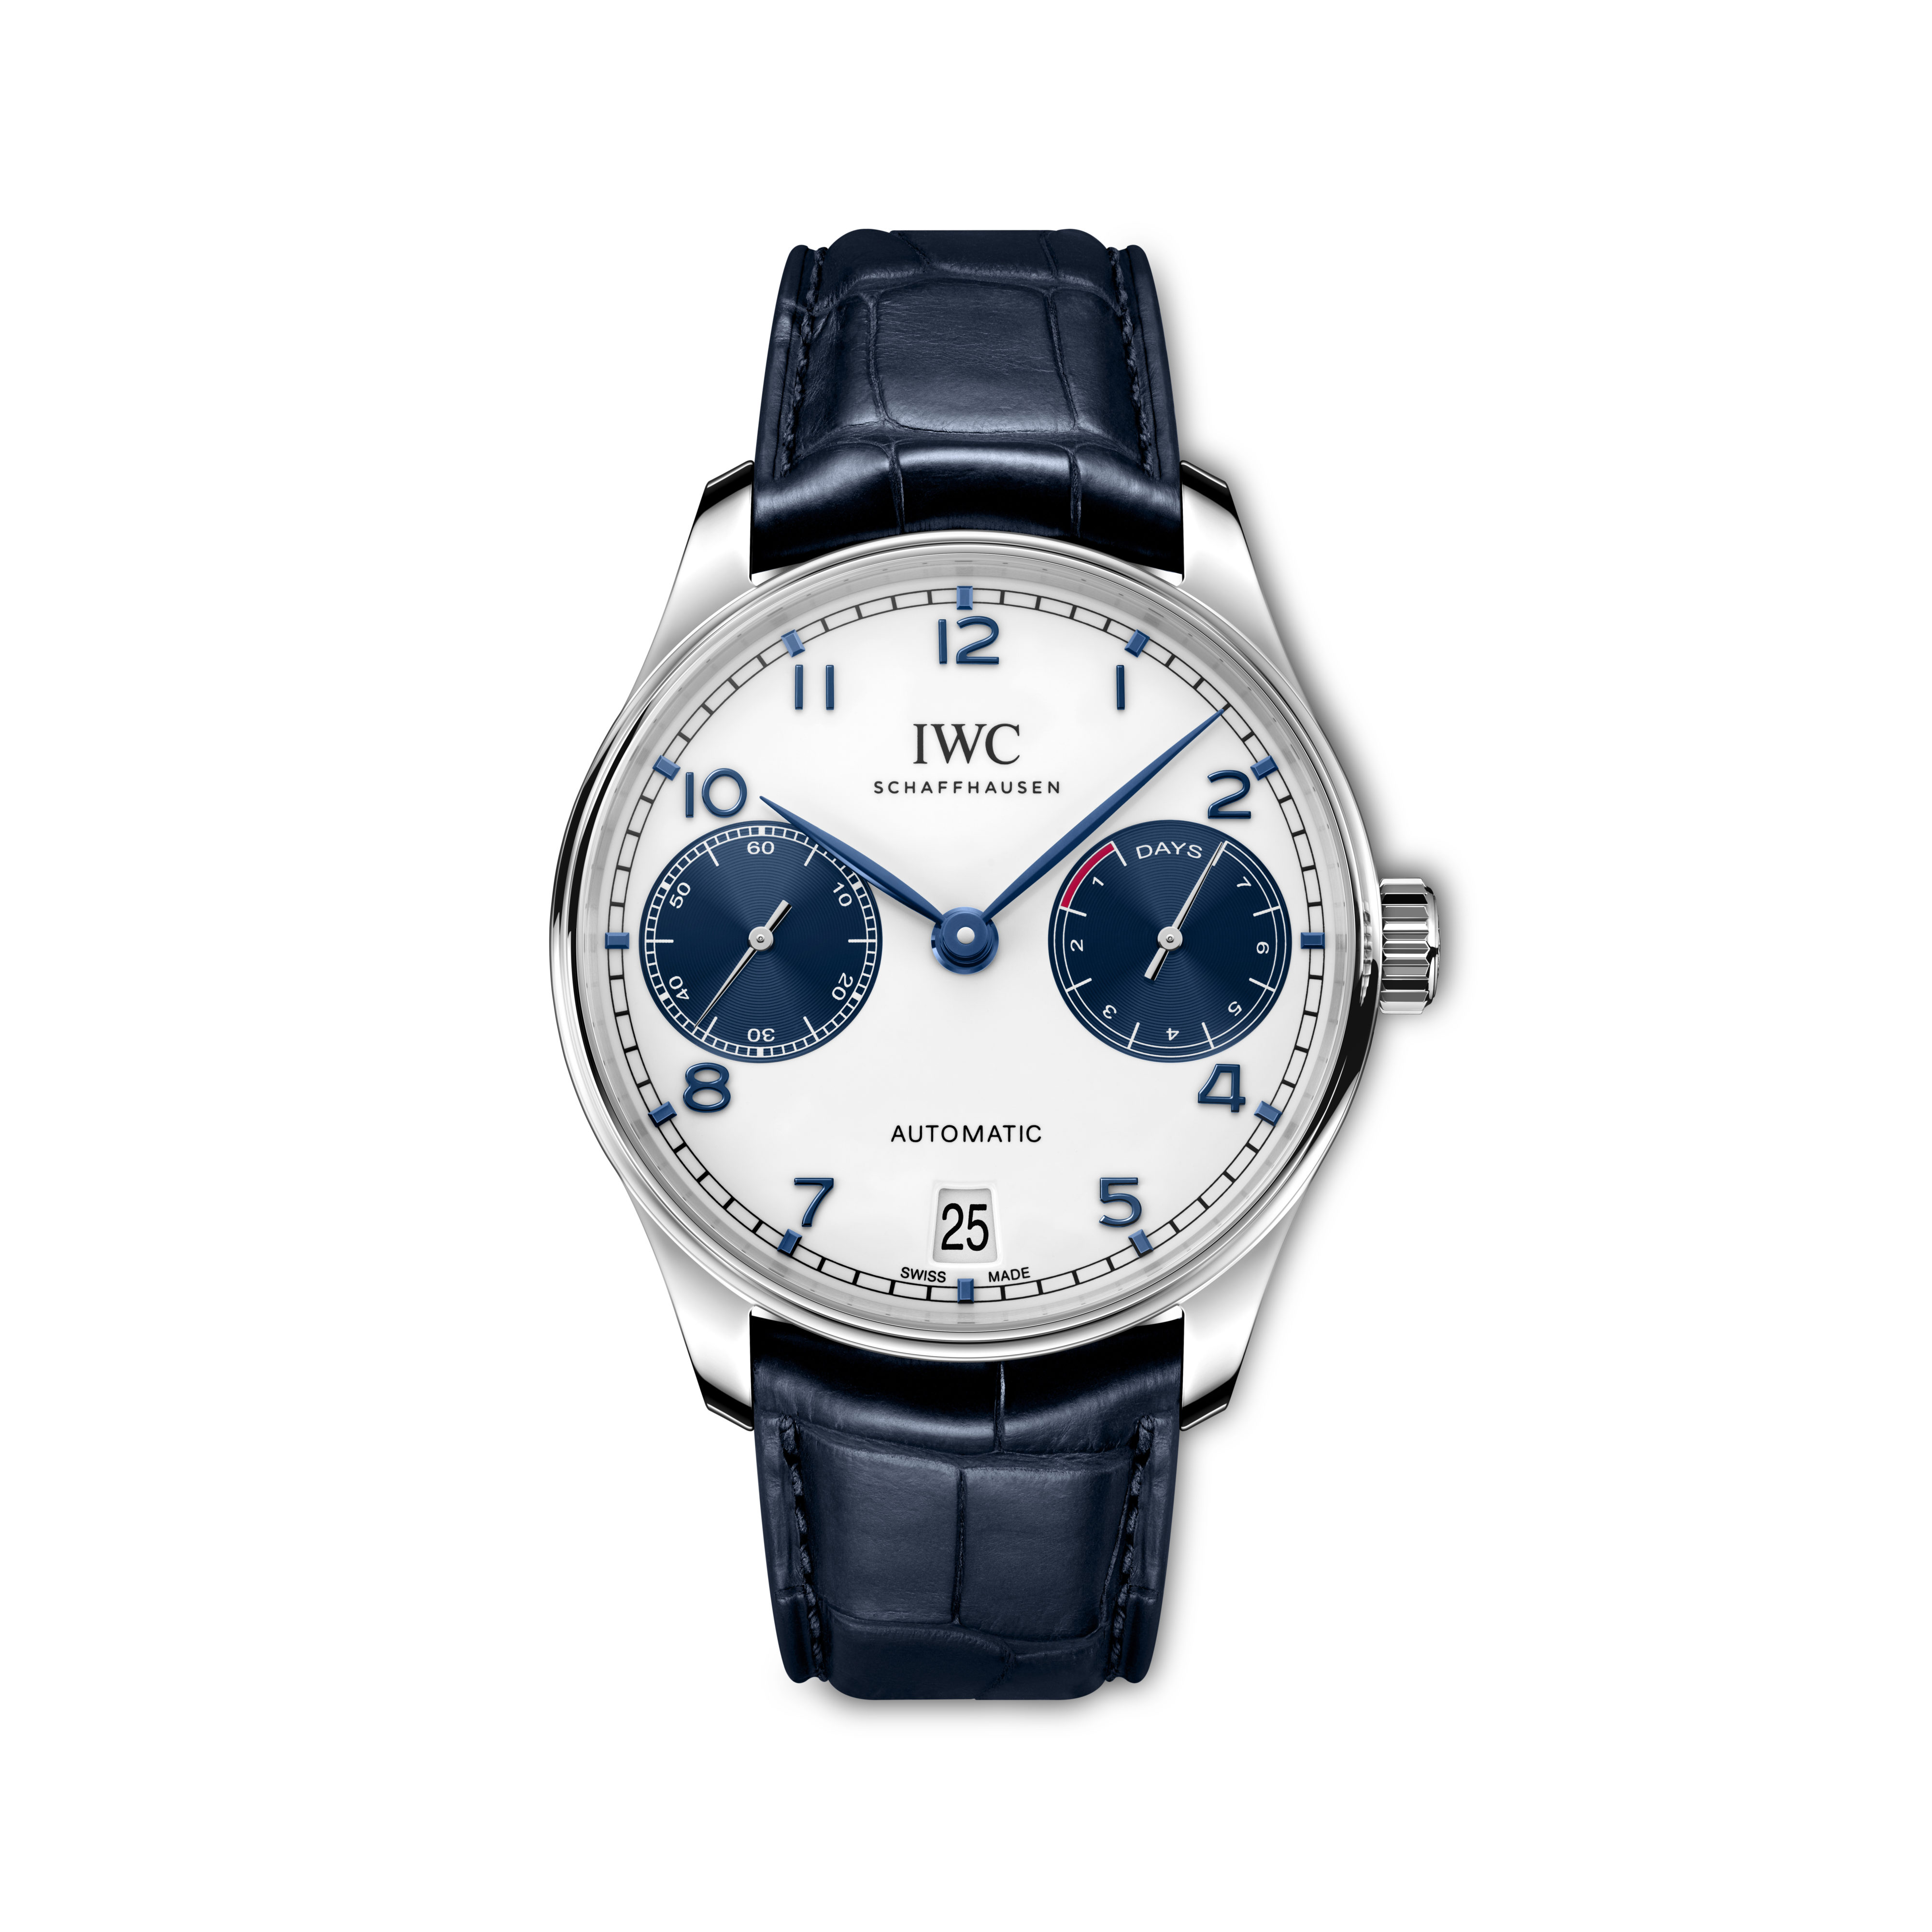 IWC Presents the Portugieser Automatic and the Portugieser Chronograph